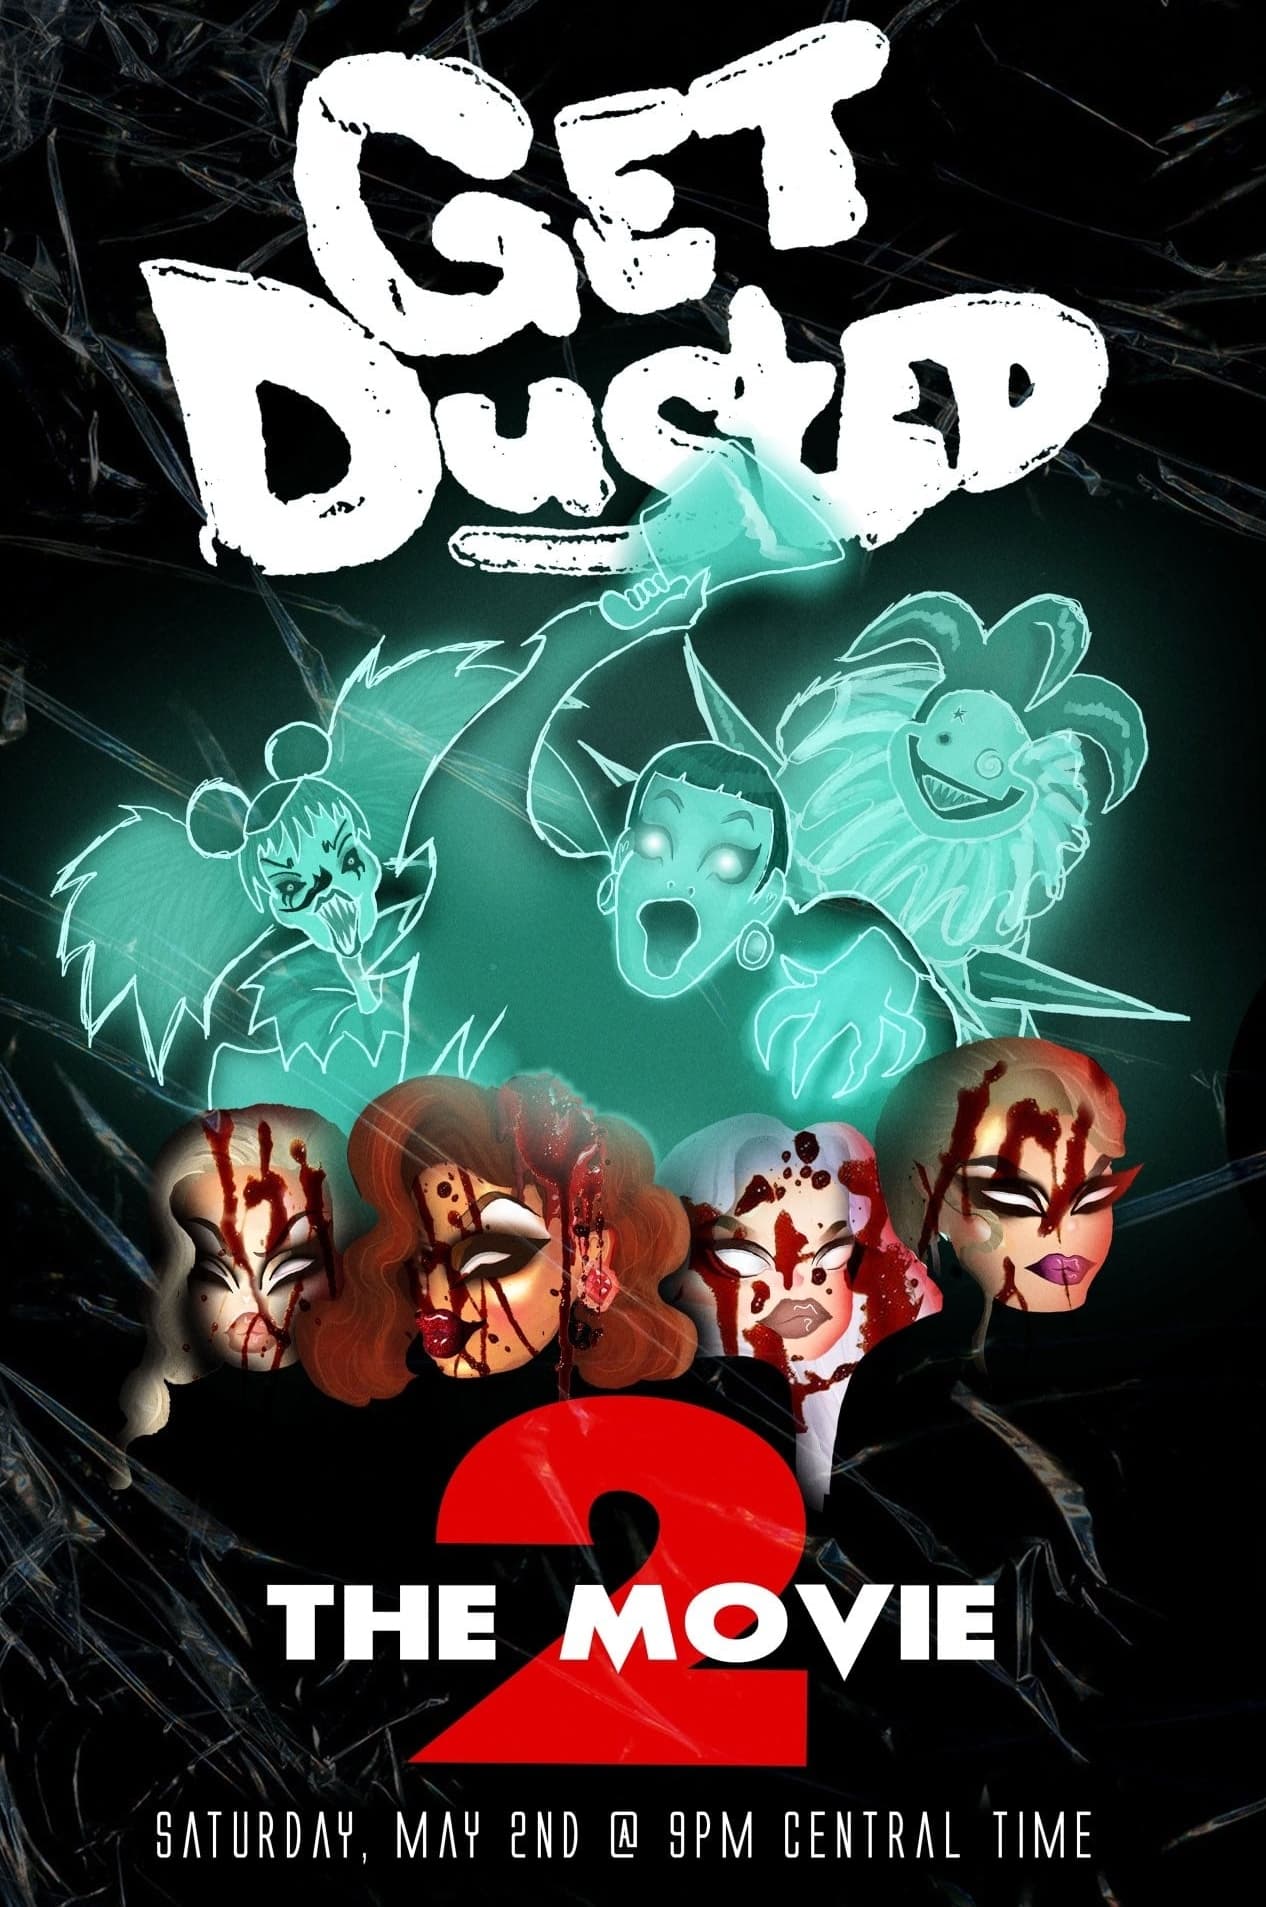 Get Dusted the Movie II